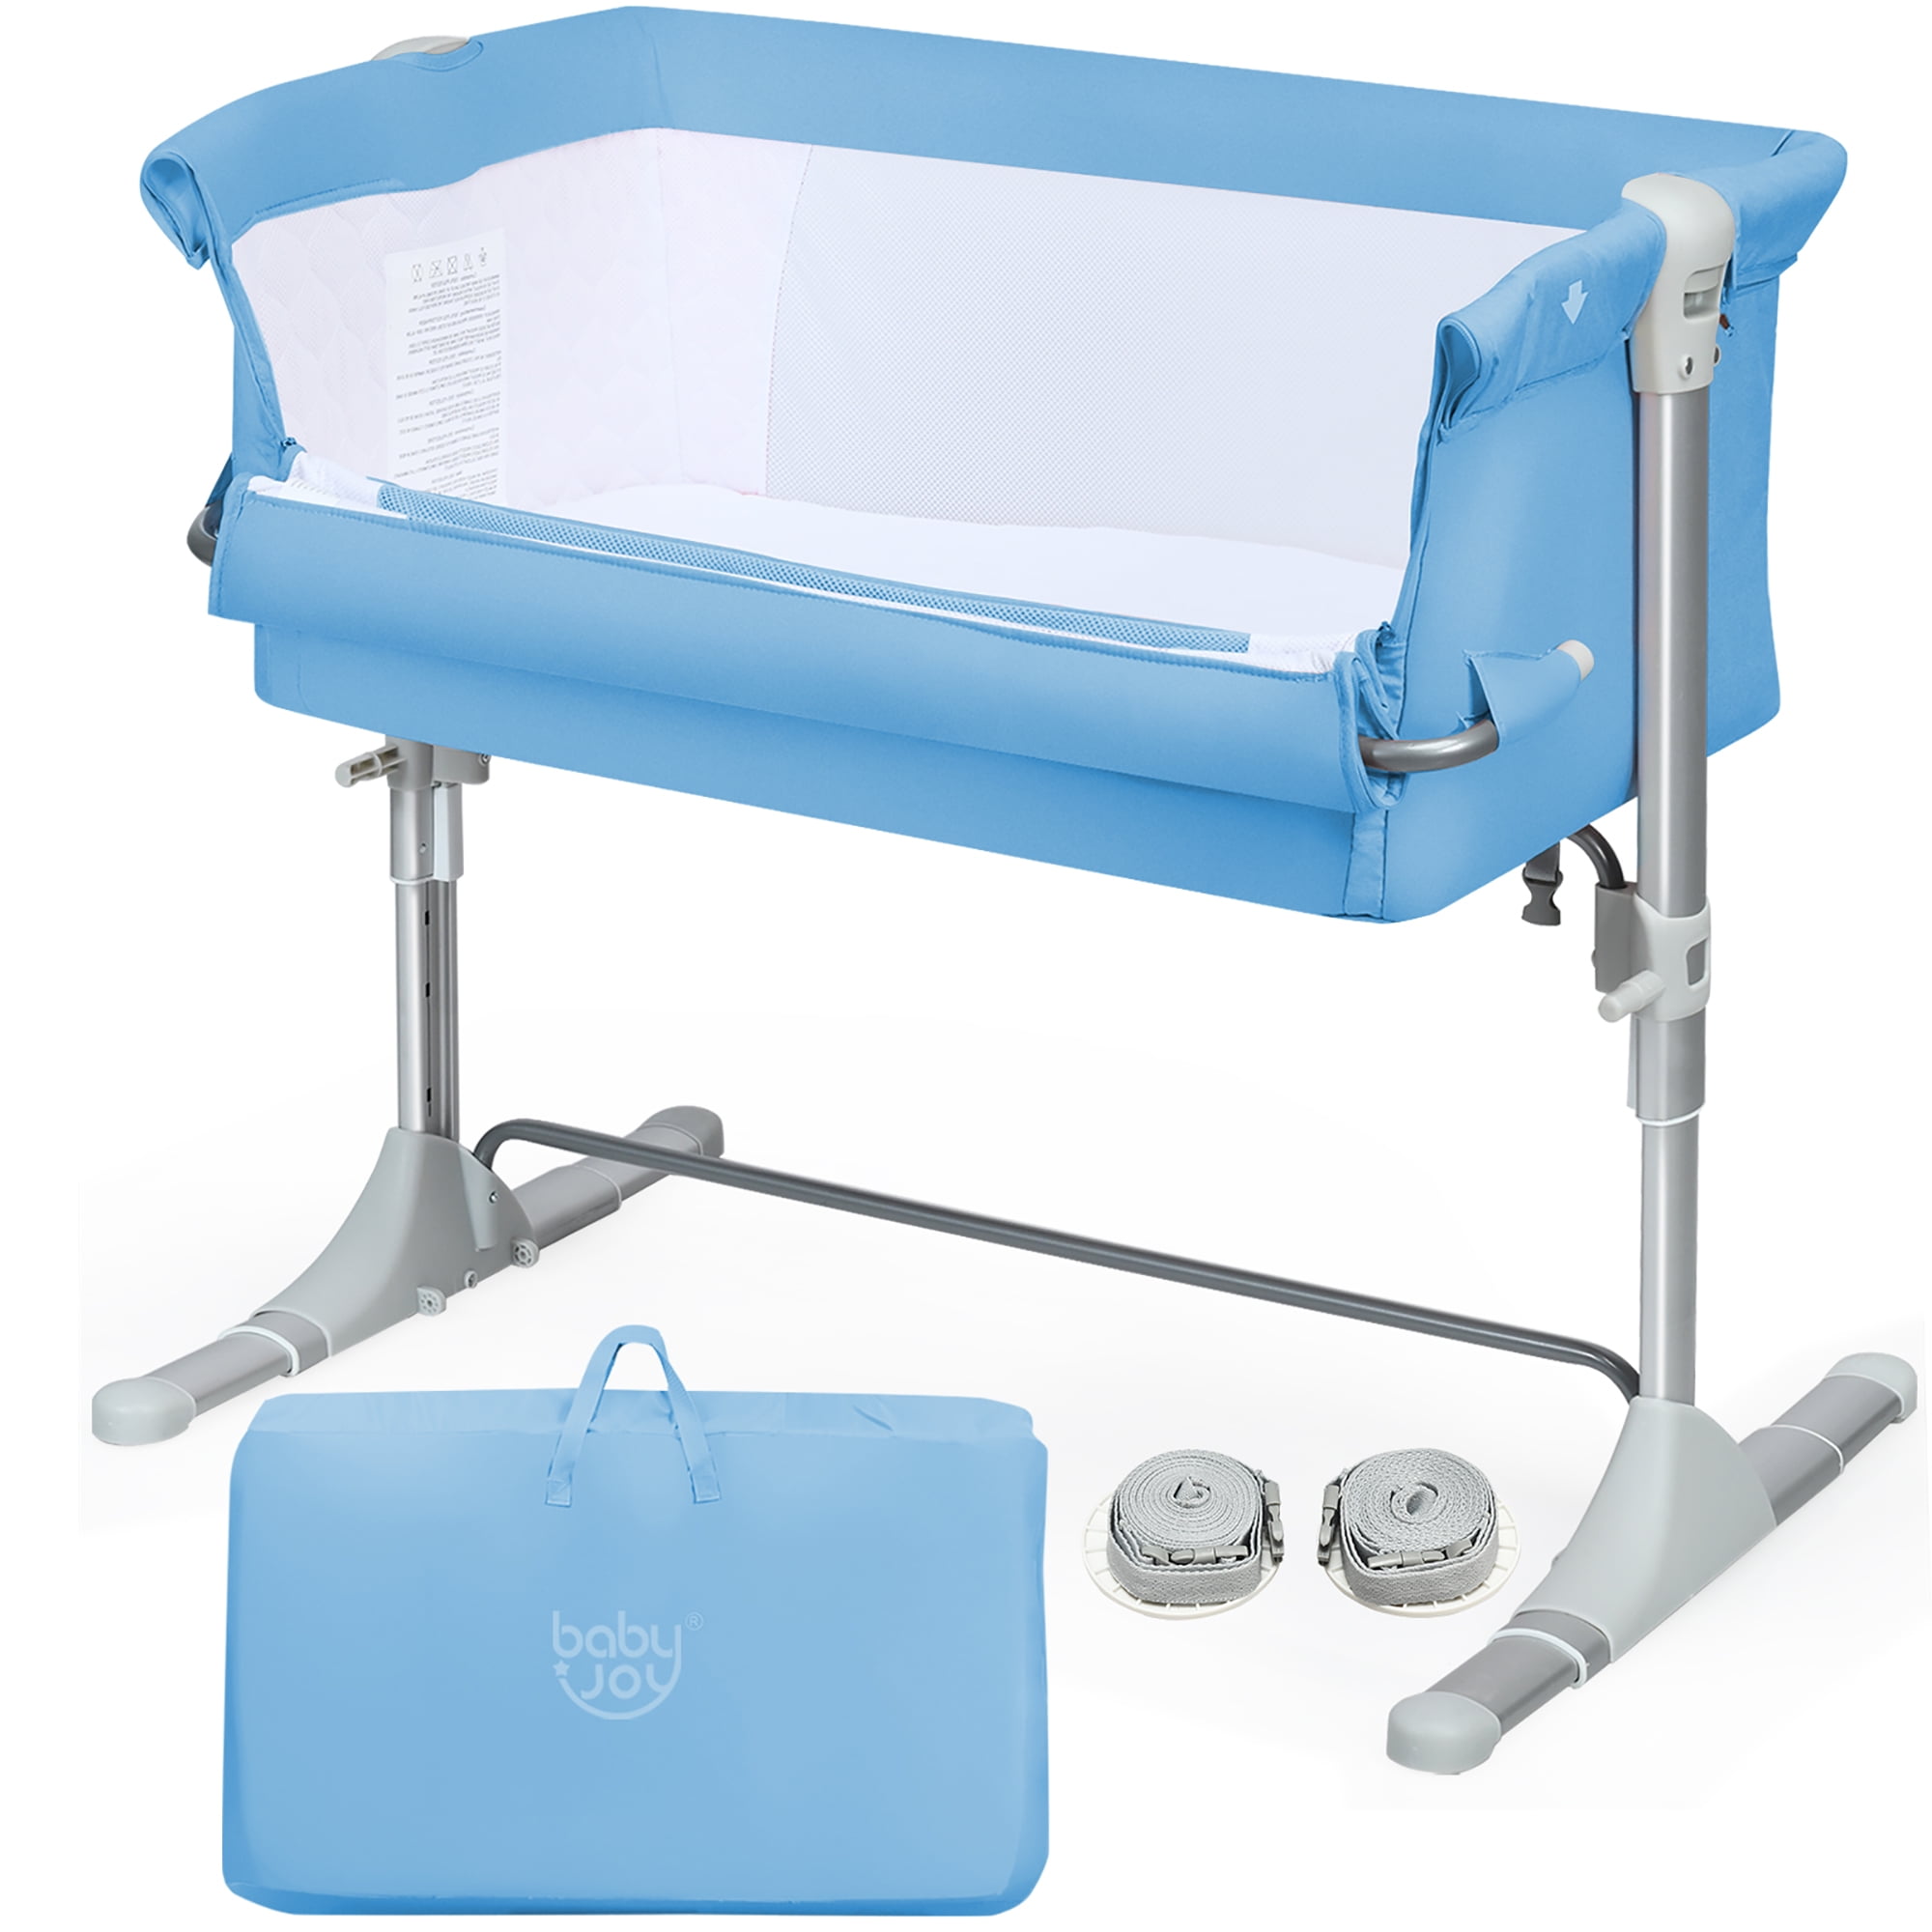 Cozy Castle Baby Bassinet Adjustable Portable Bed to Bed Crib for Infant Baby Easy Folding Portable Crib with Storage Basket for Newborn Bedside Sleeper for Baby Grey 